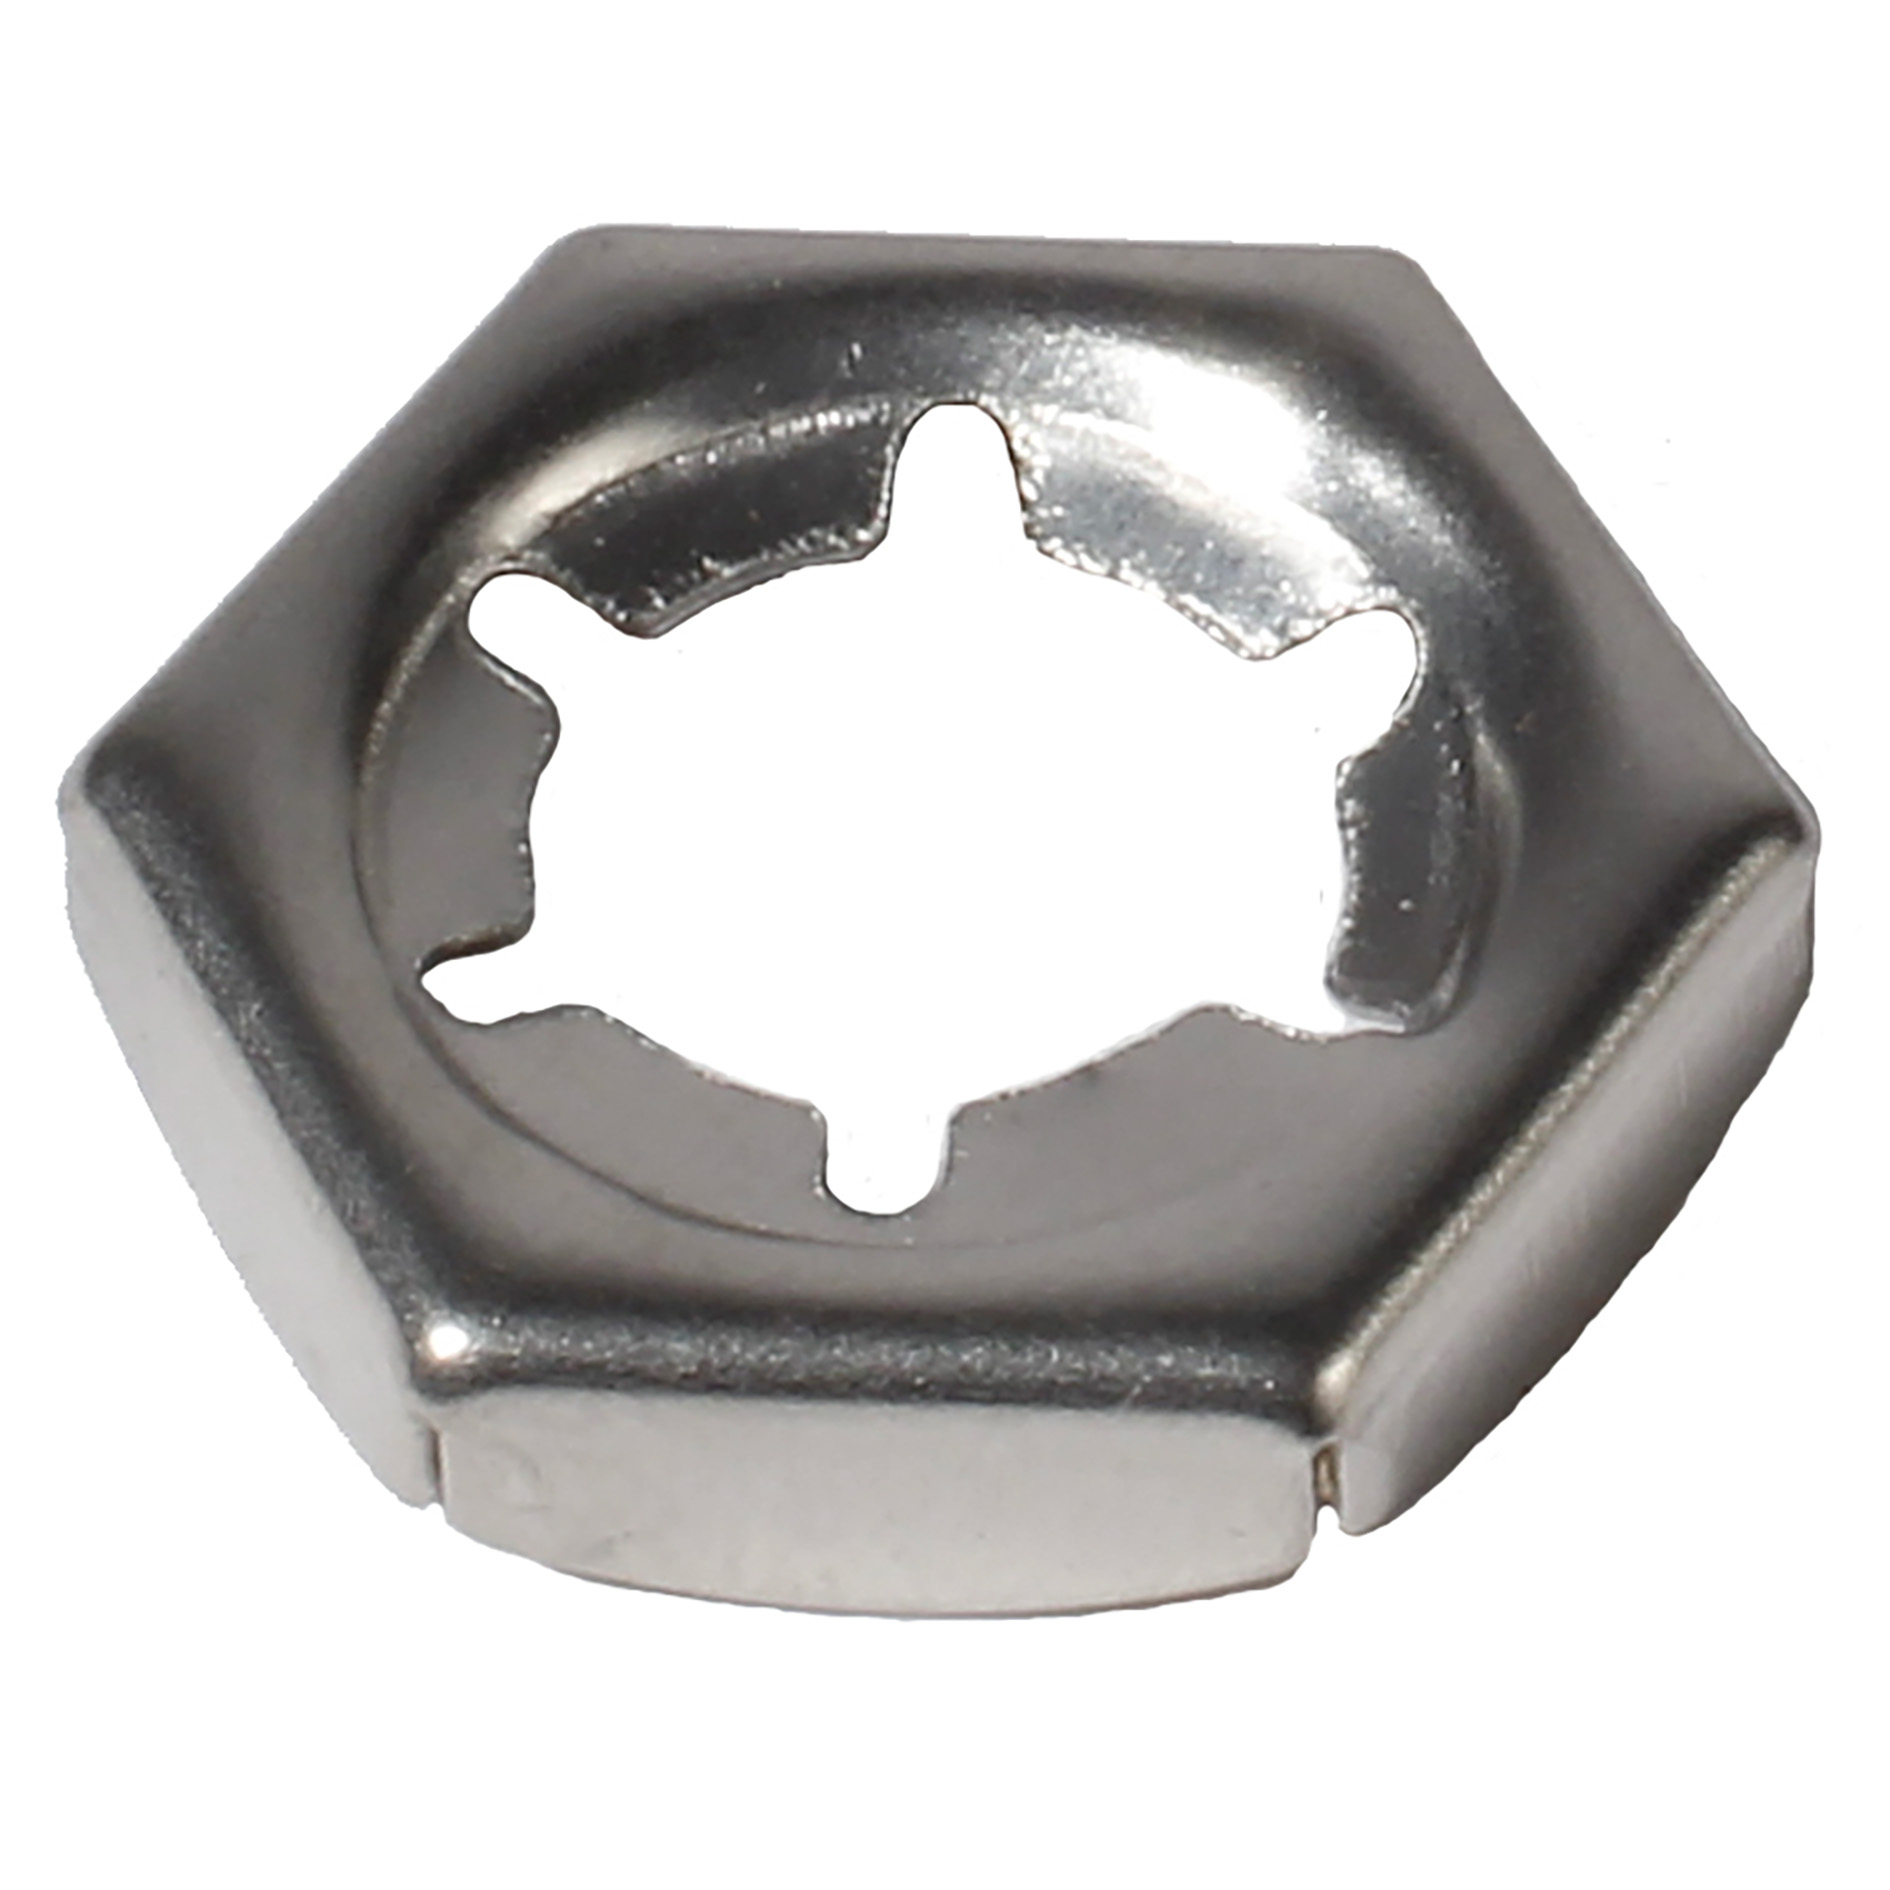 Self locking counter nut - For axial locking - Stainless steel - DIN 7967